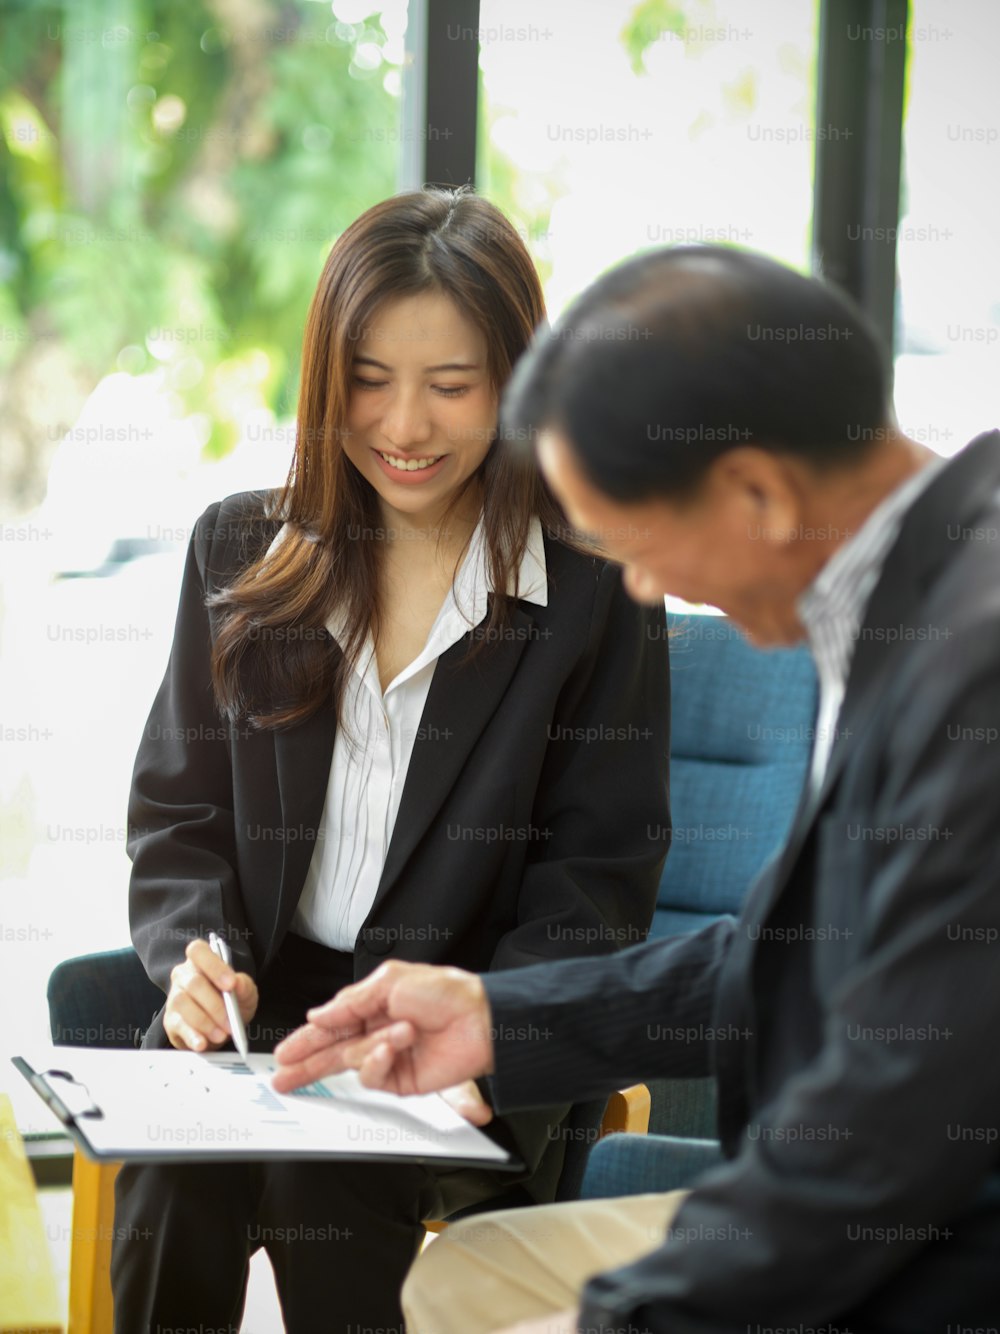 Cheerful young businesswoman working together with a professional aged businessman in meeting room.